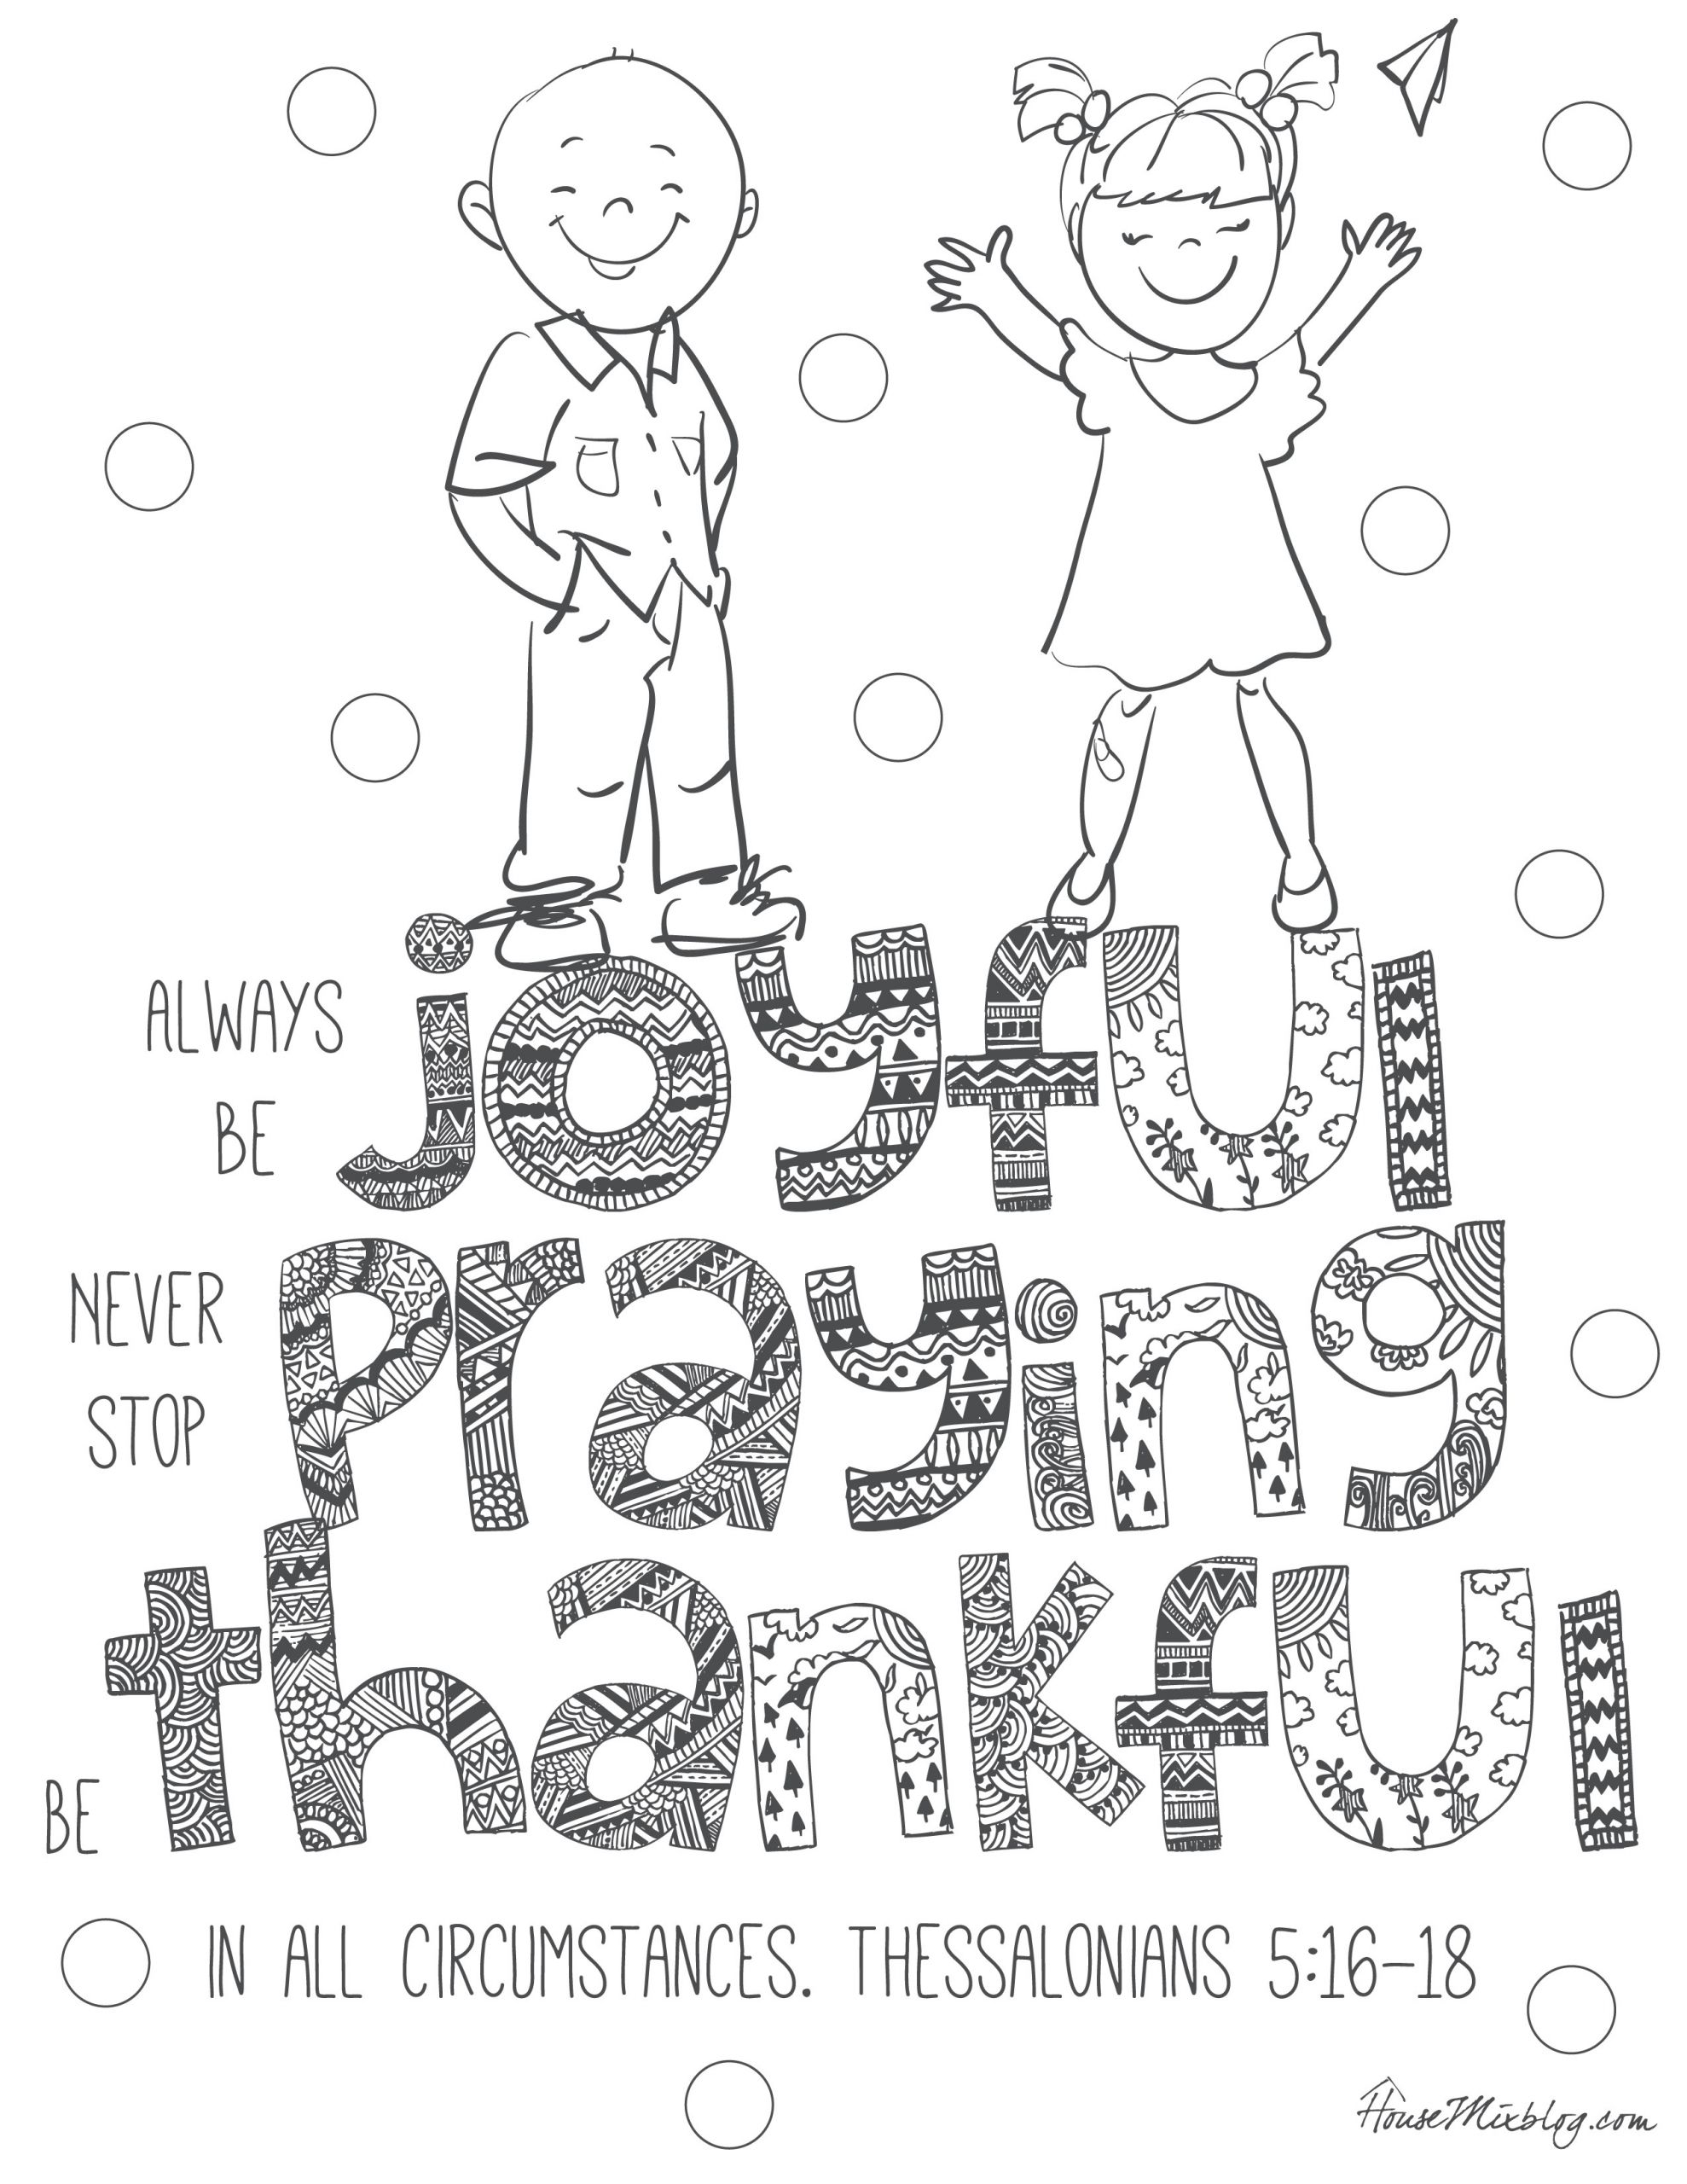 Scripture Coloring Pages For Kids
 11 Bible verses to teach kids with printables to color